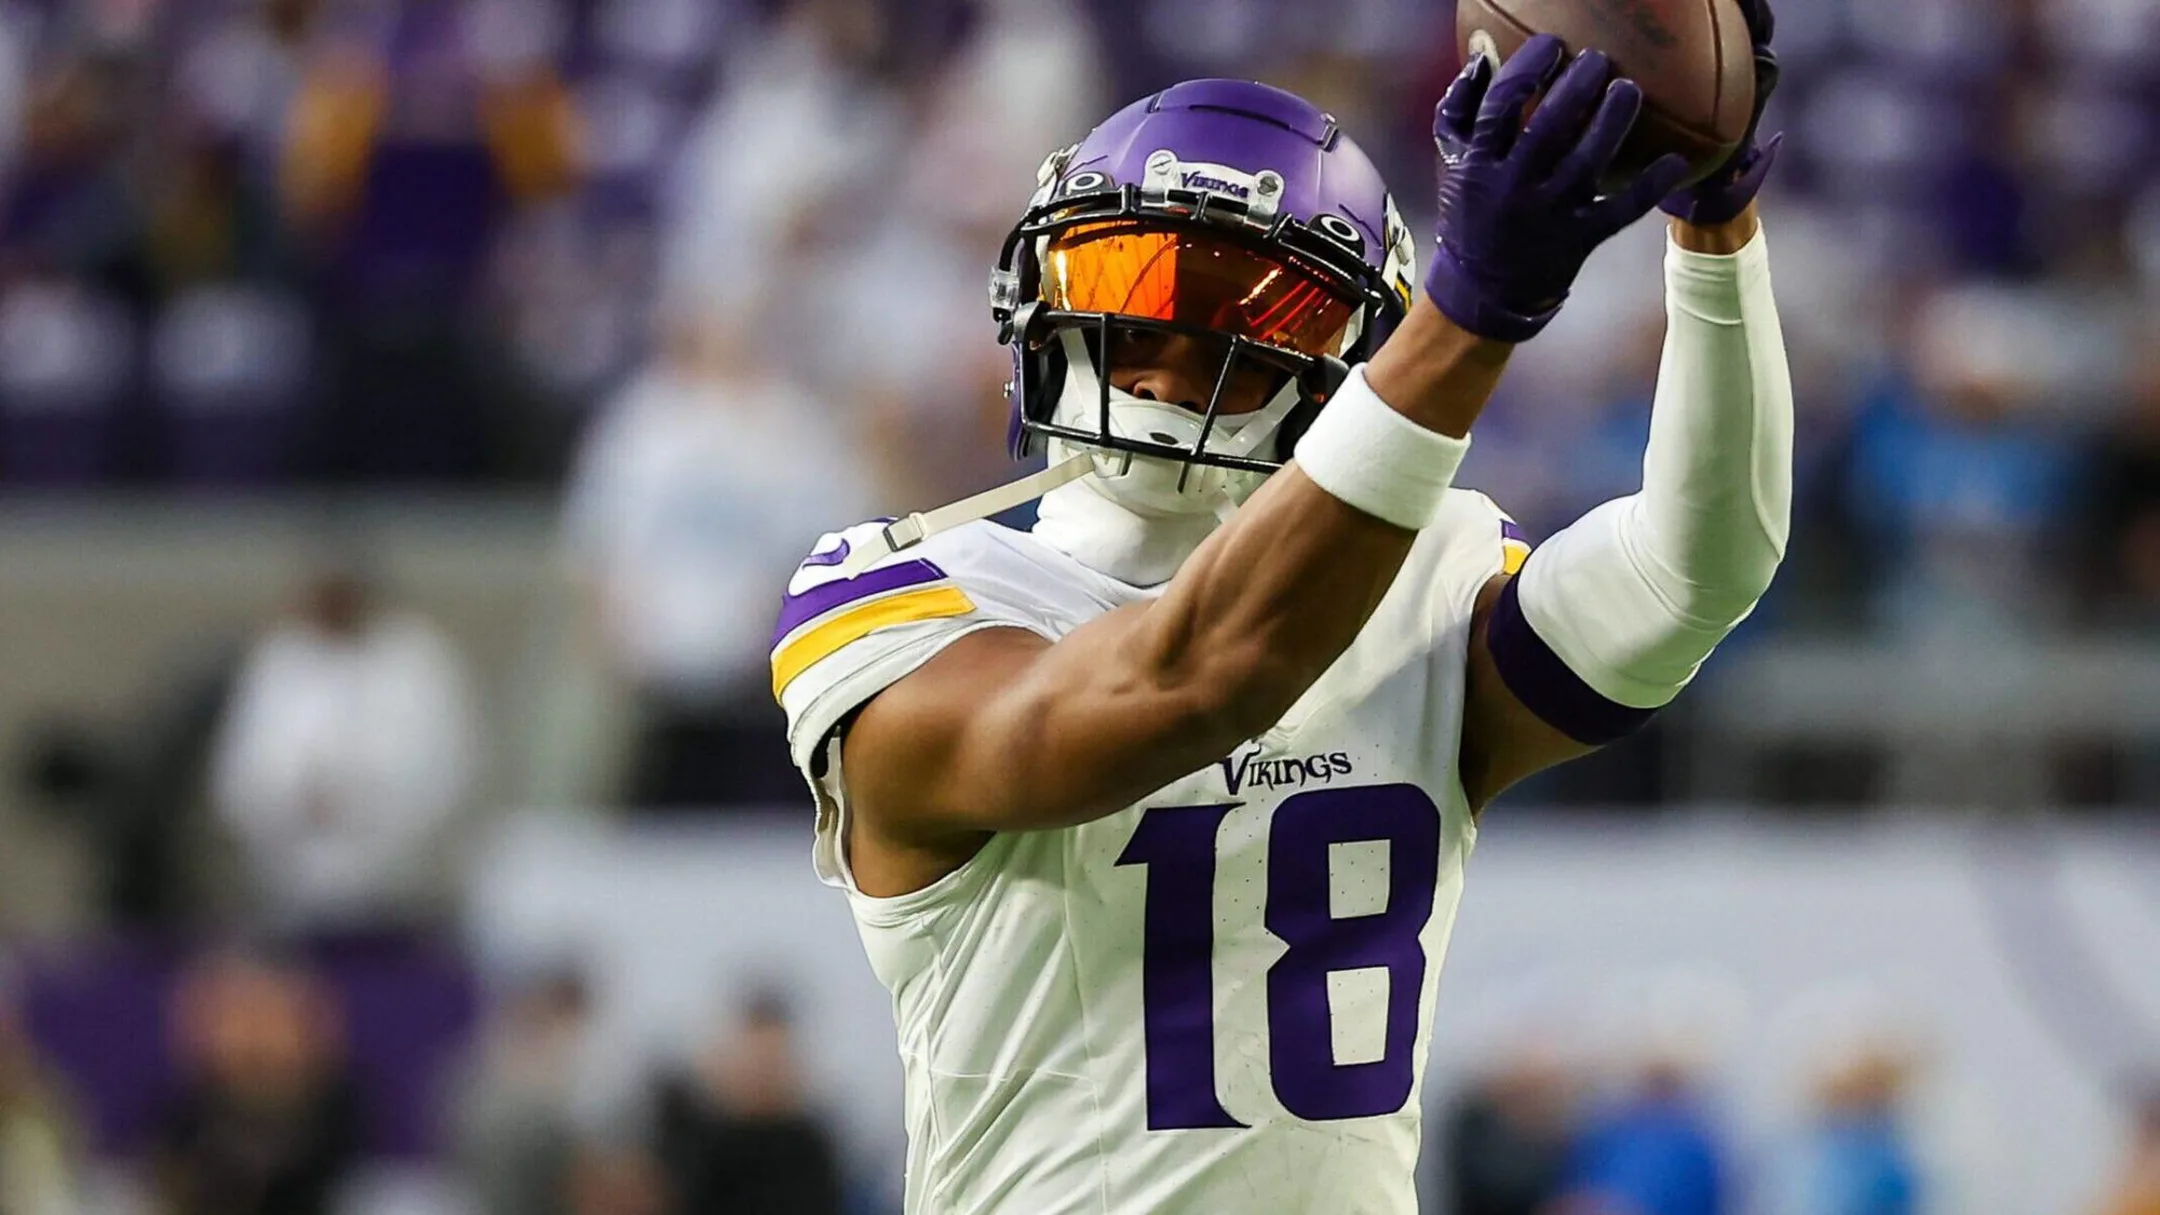  Justin Jefferson's Offseason Absence A Familiar Story with New Twists for the Vikings.